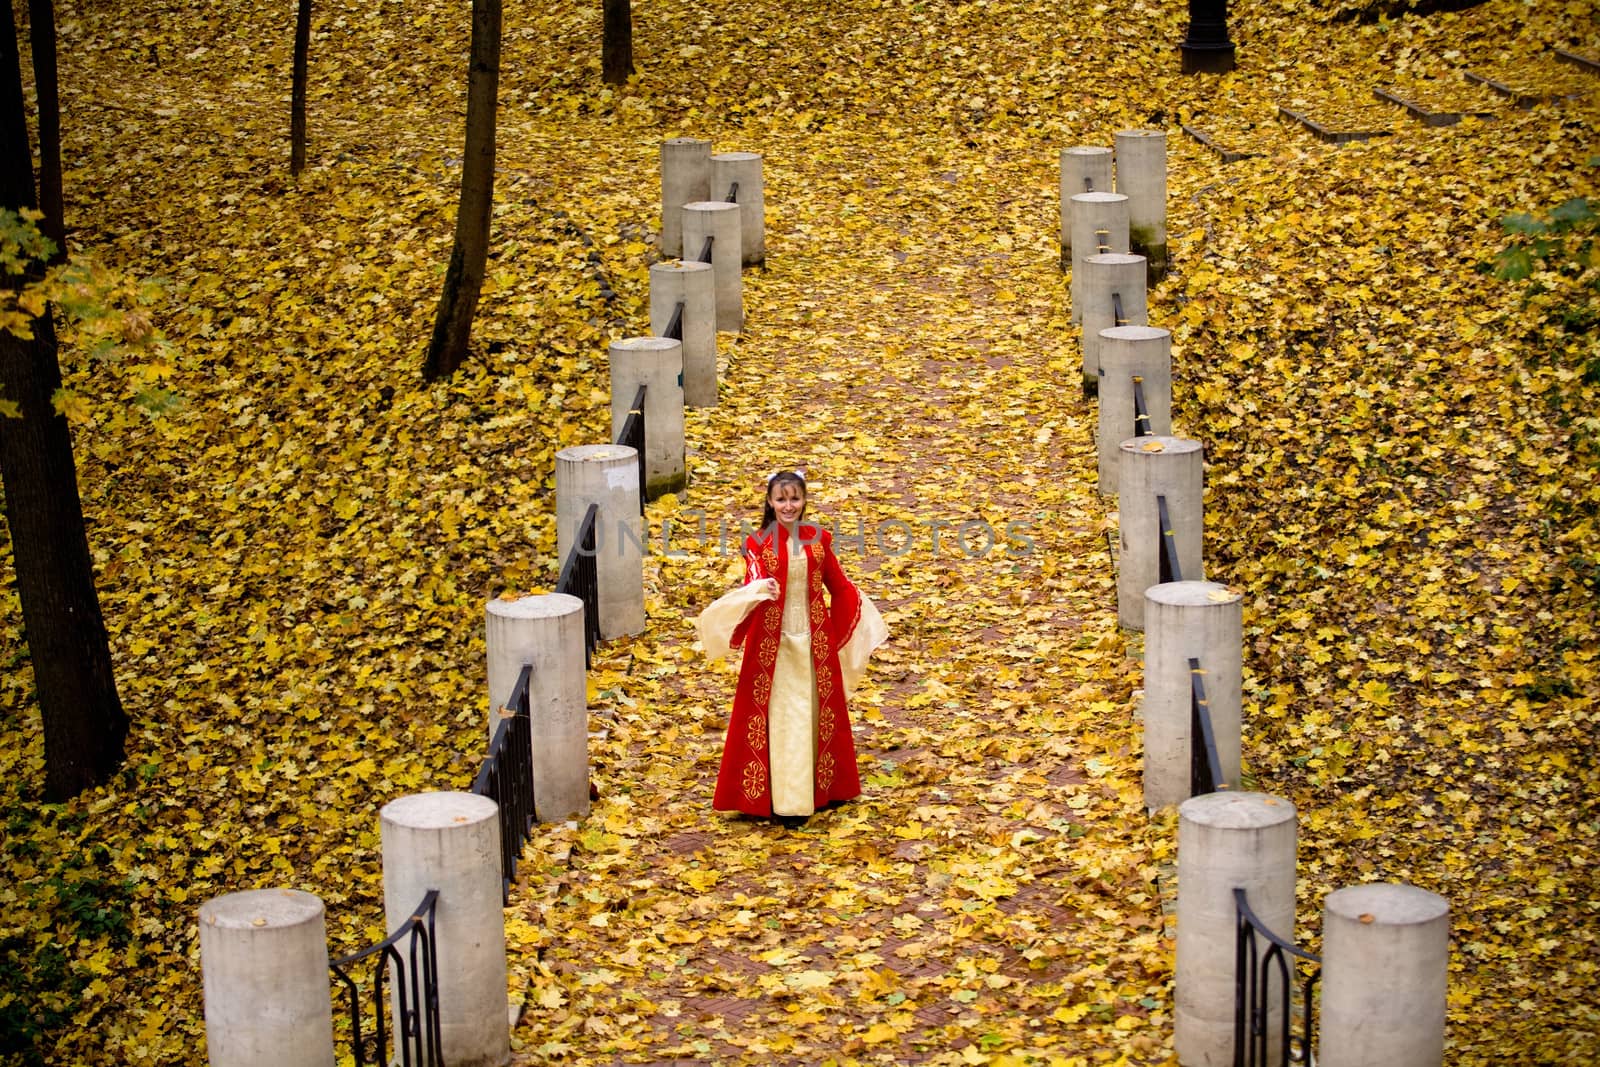 lady in medieval red dress in the autumn forest
